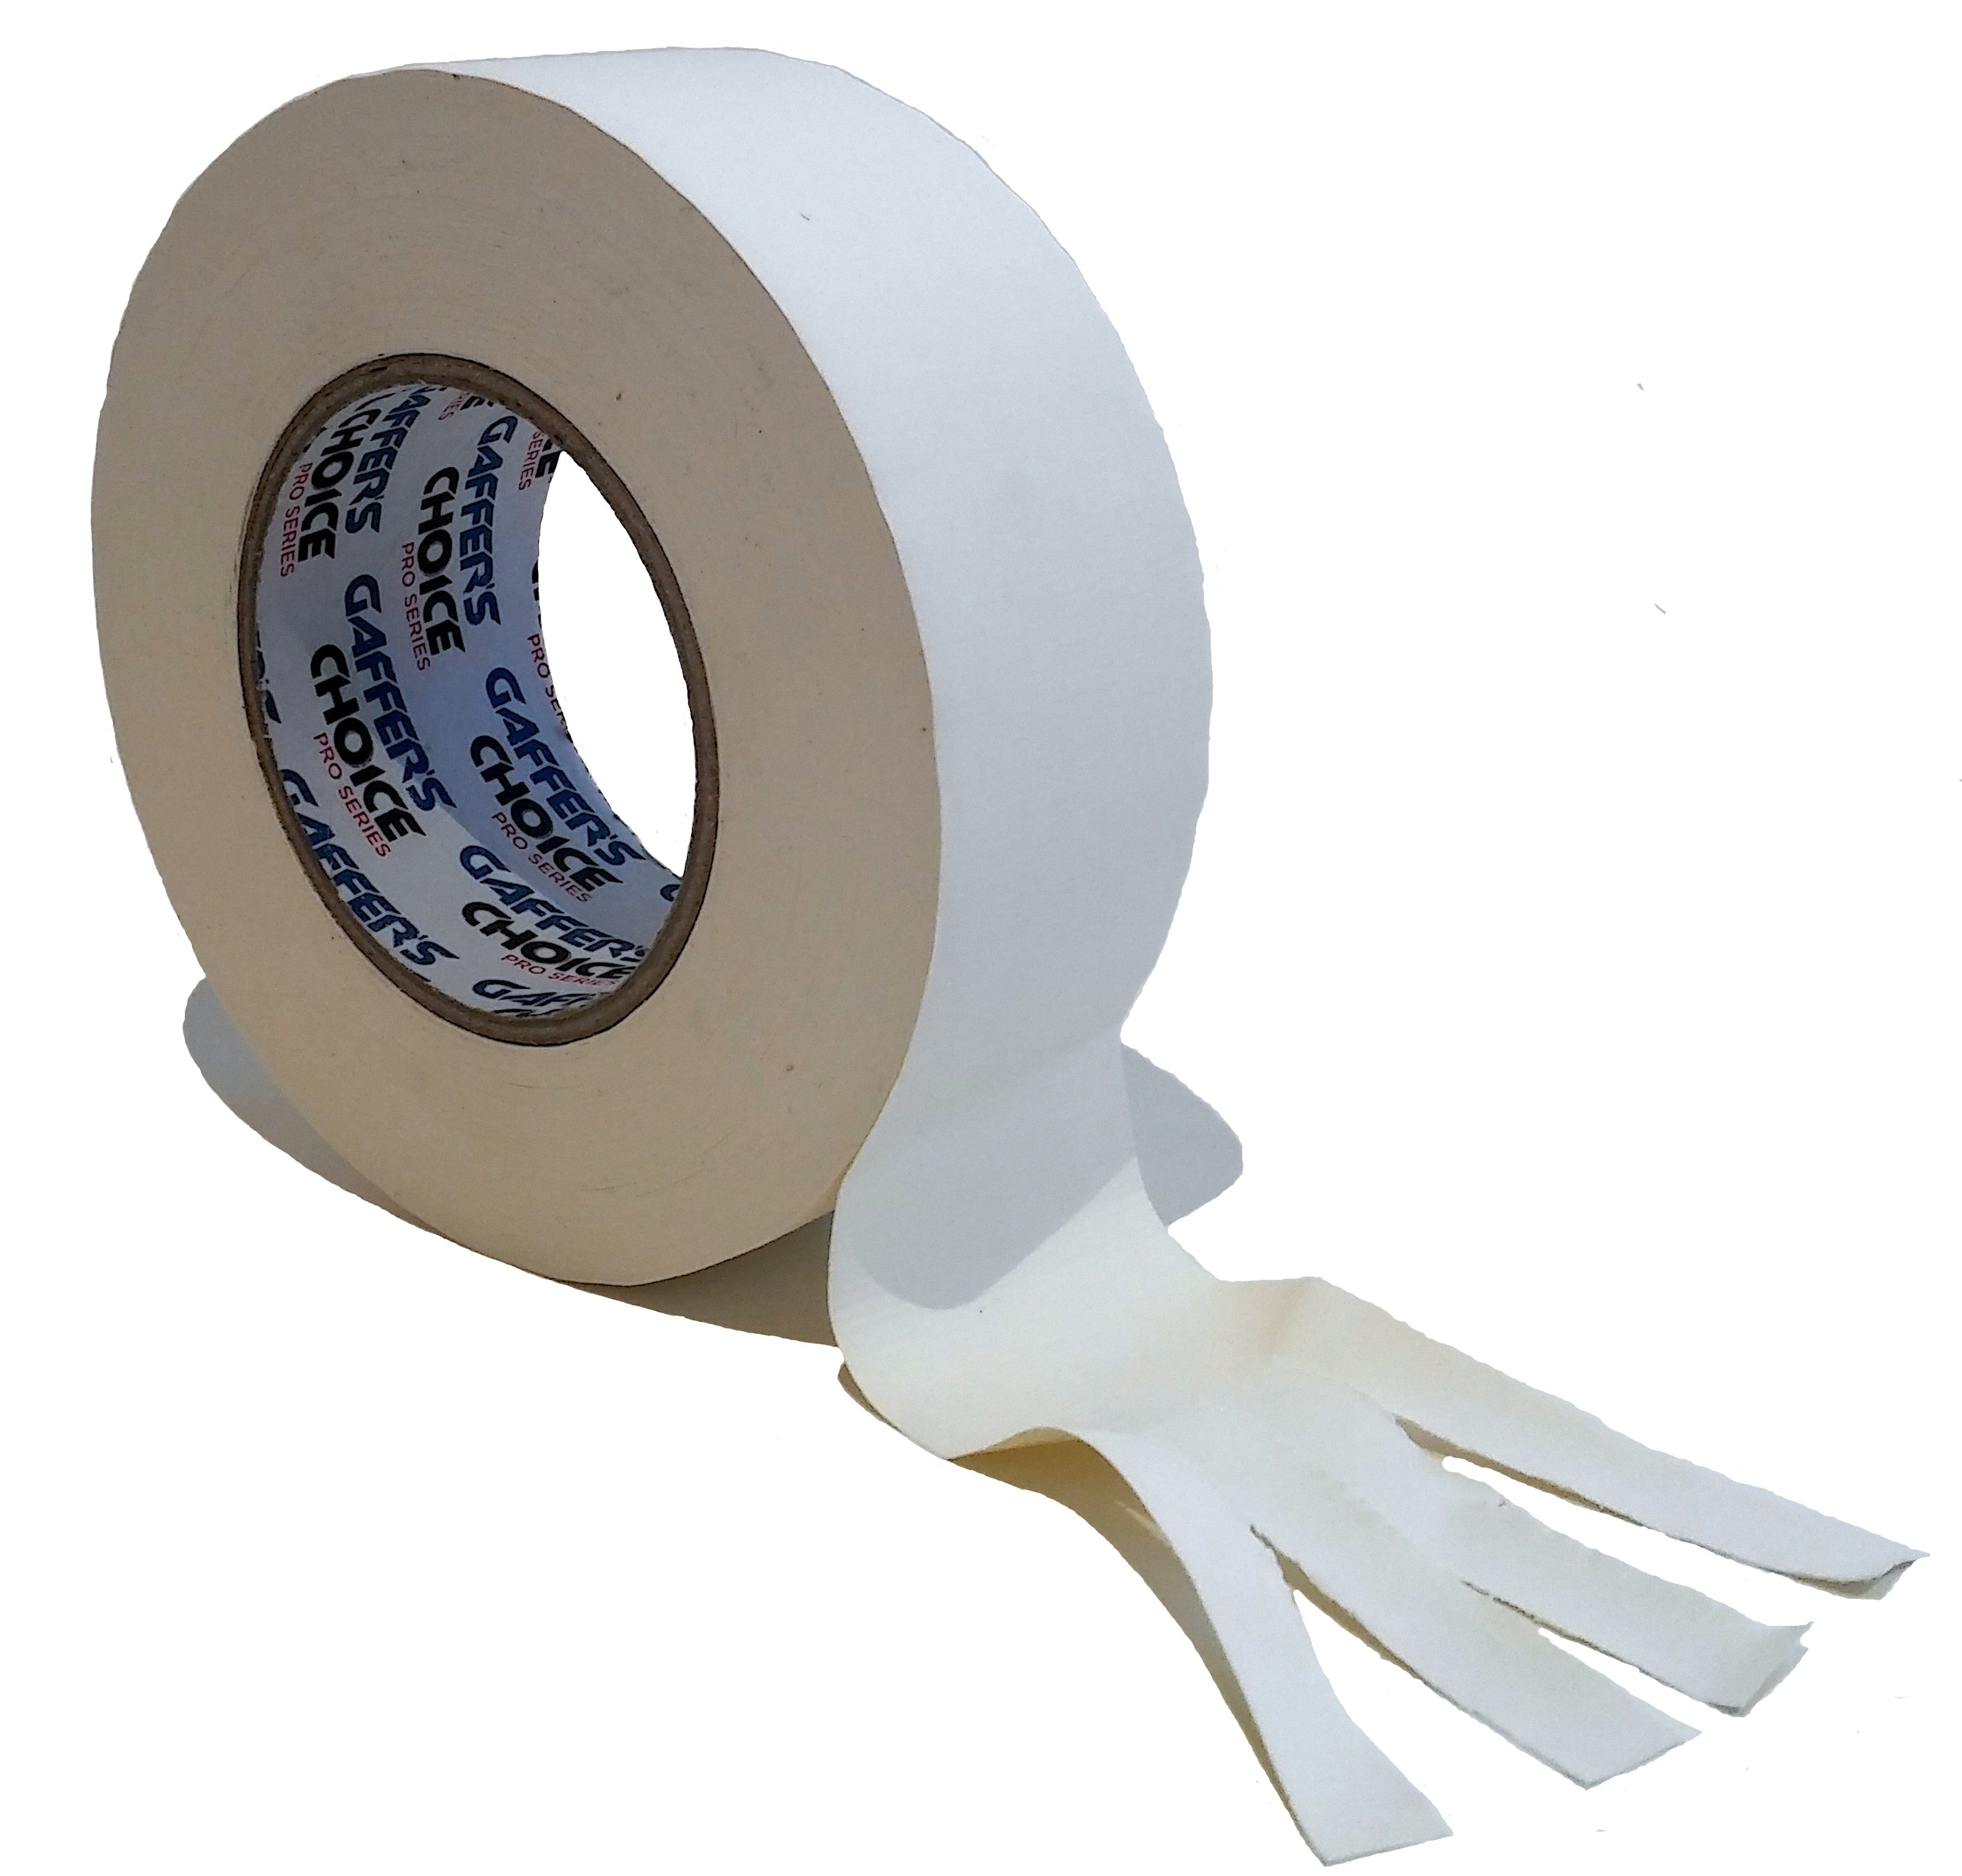 GAFFER TAPE (White) - 2in. x 35 yard - Better than Duct Tape